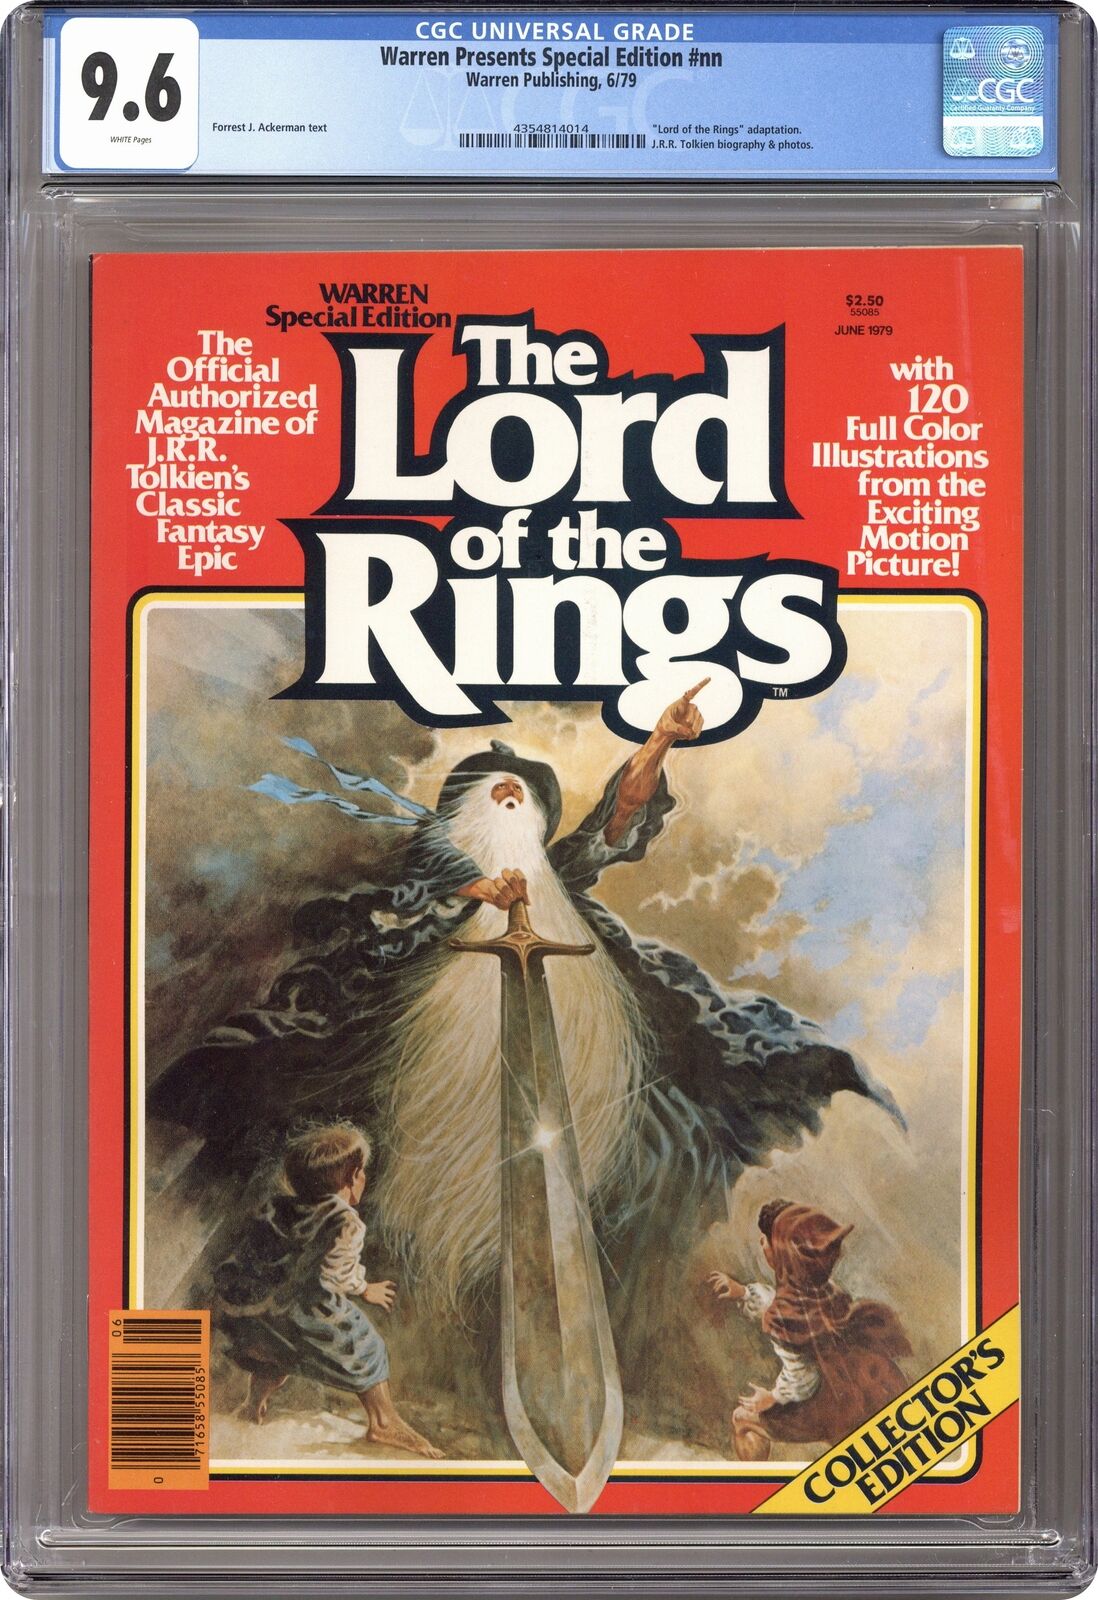 Warren Presents Lord of the Rings #1 CGC 9.6 1979 4354814014